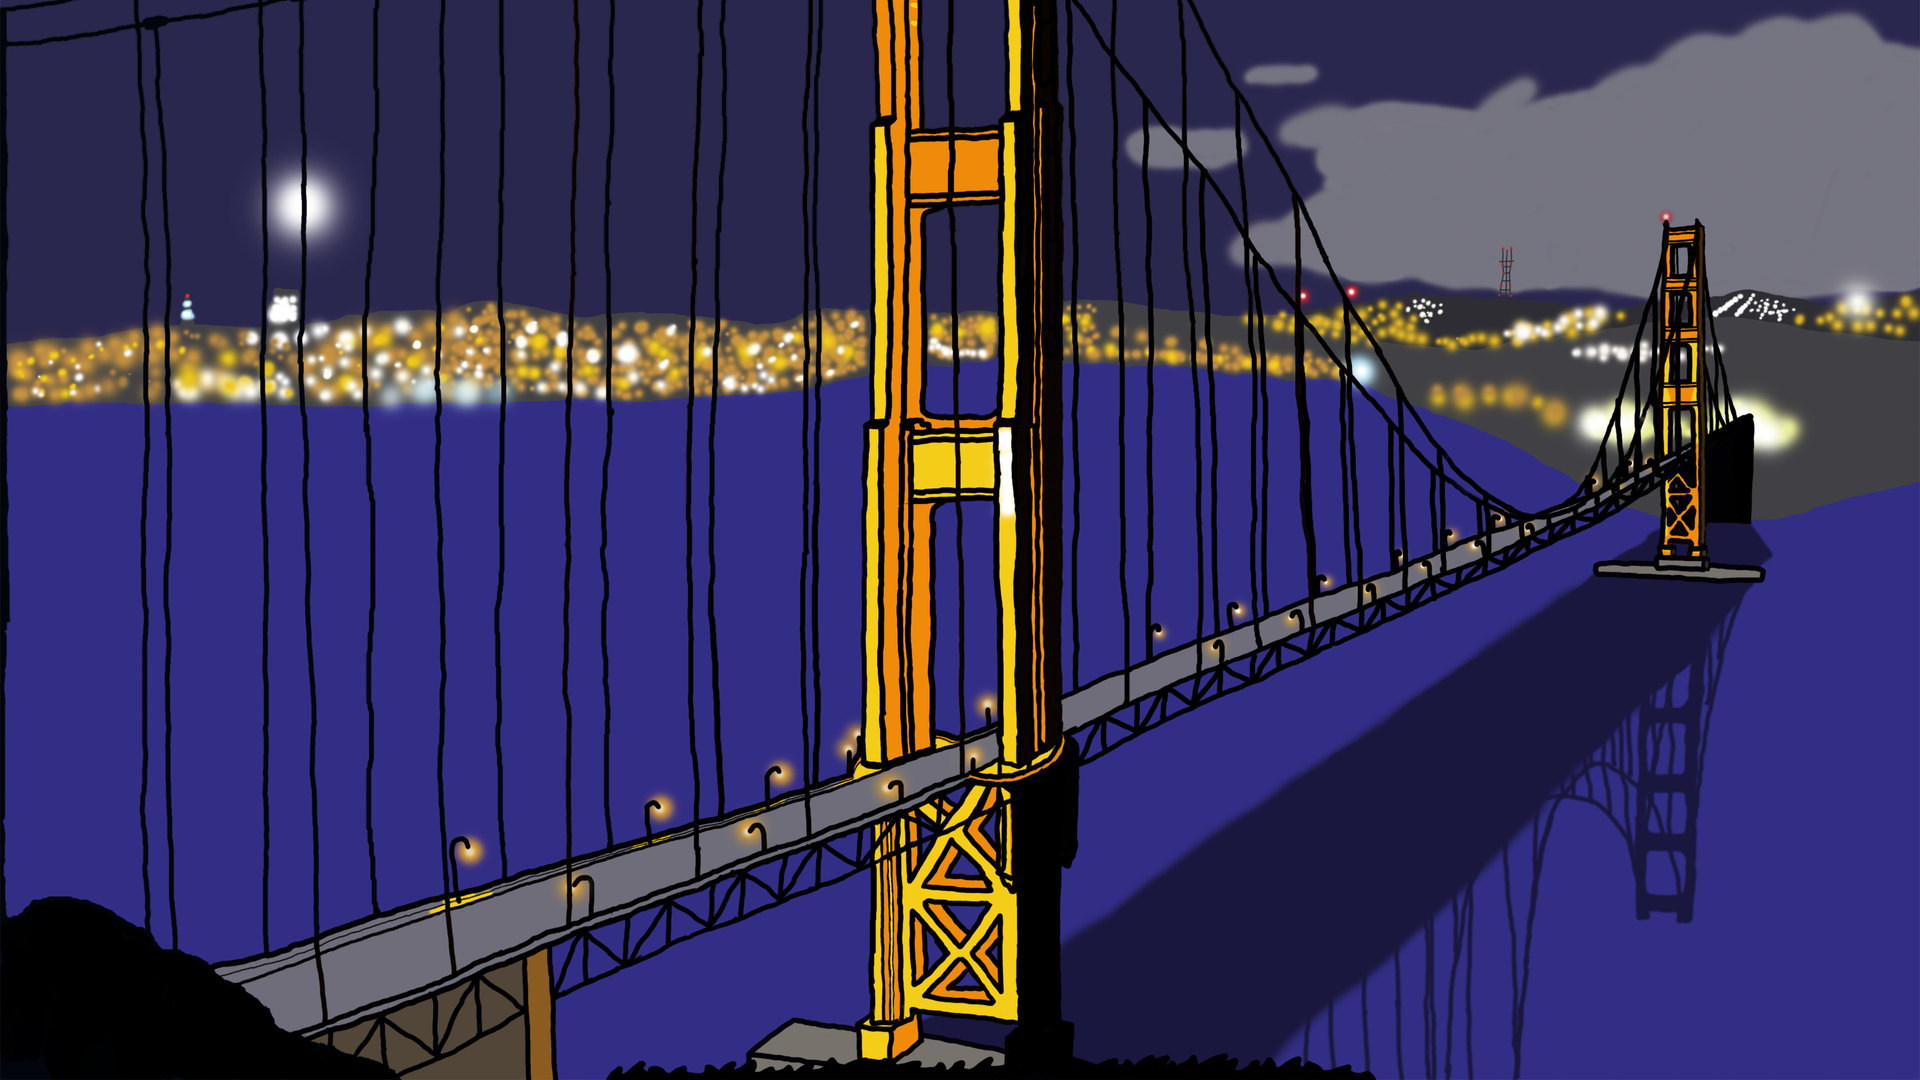 Digital artwork showing the Golden Gate Bridge lit up at night and a bright cityscape